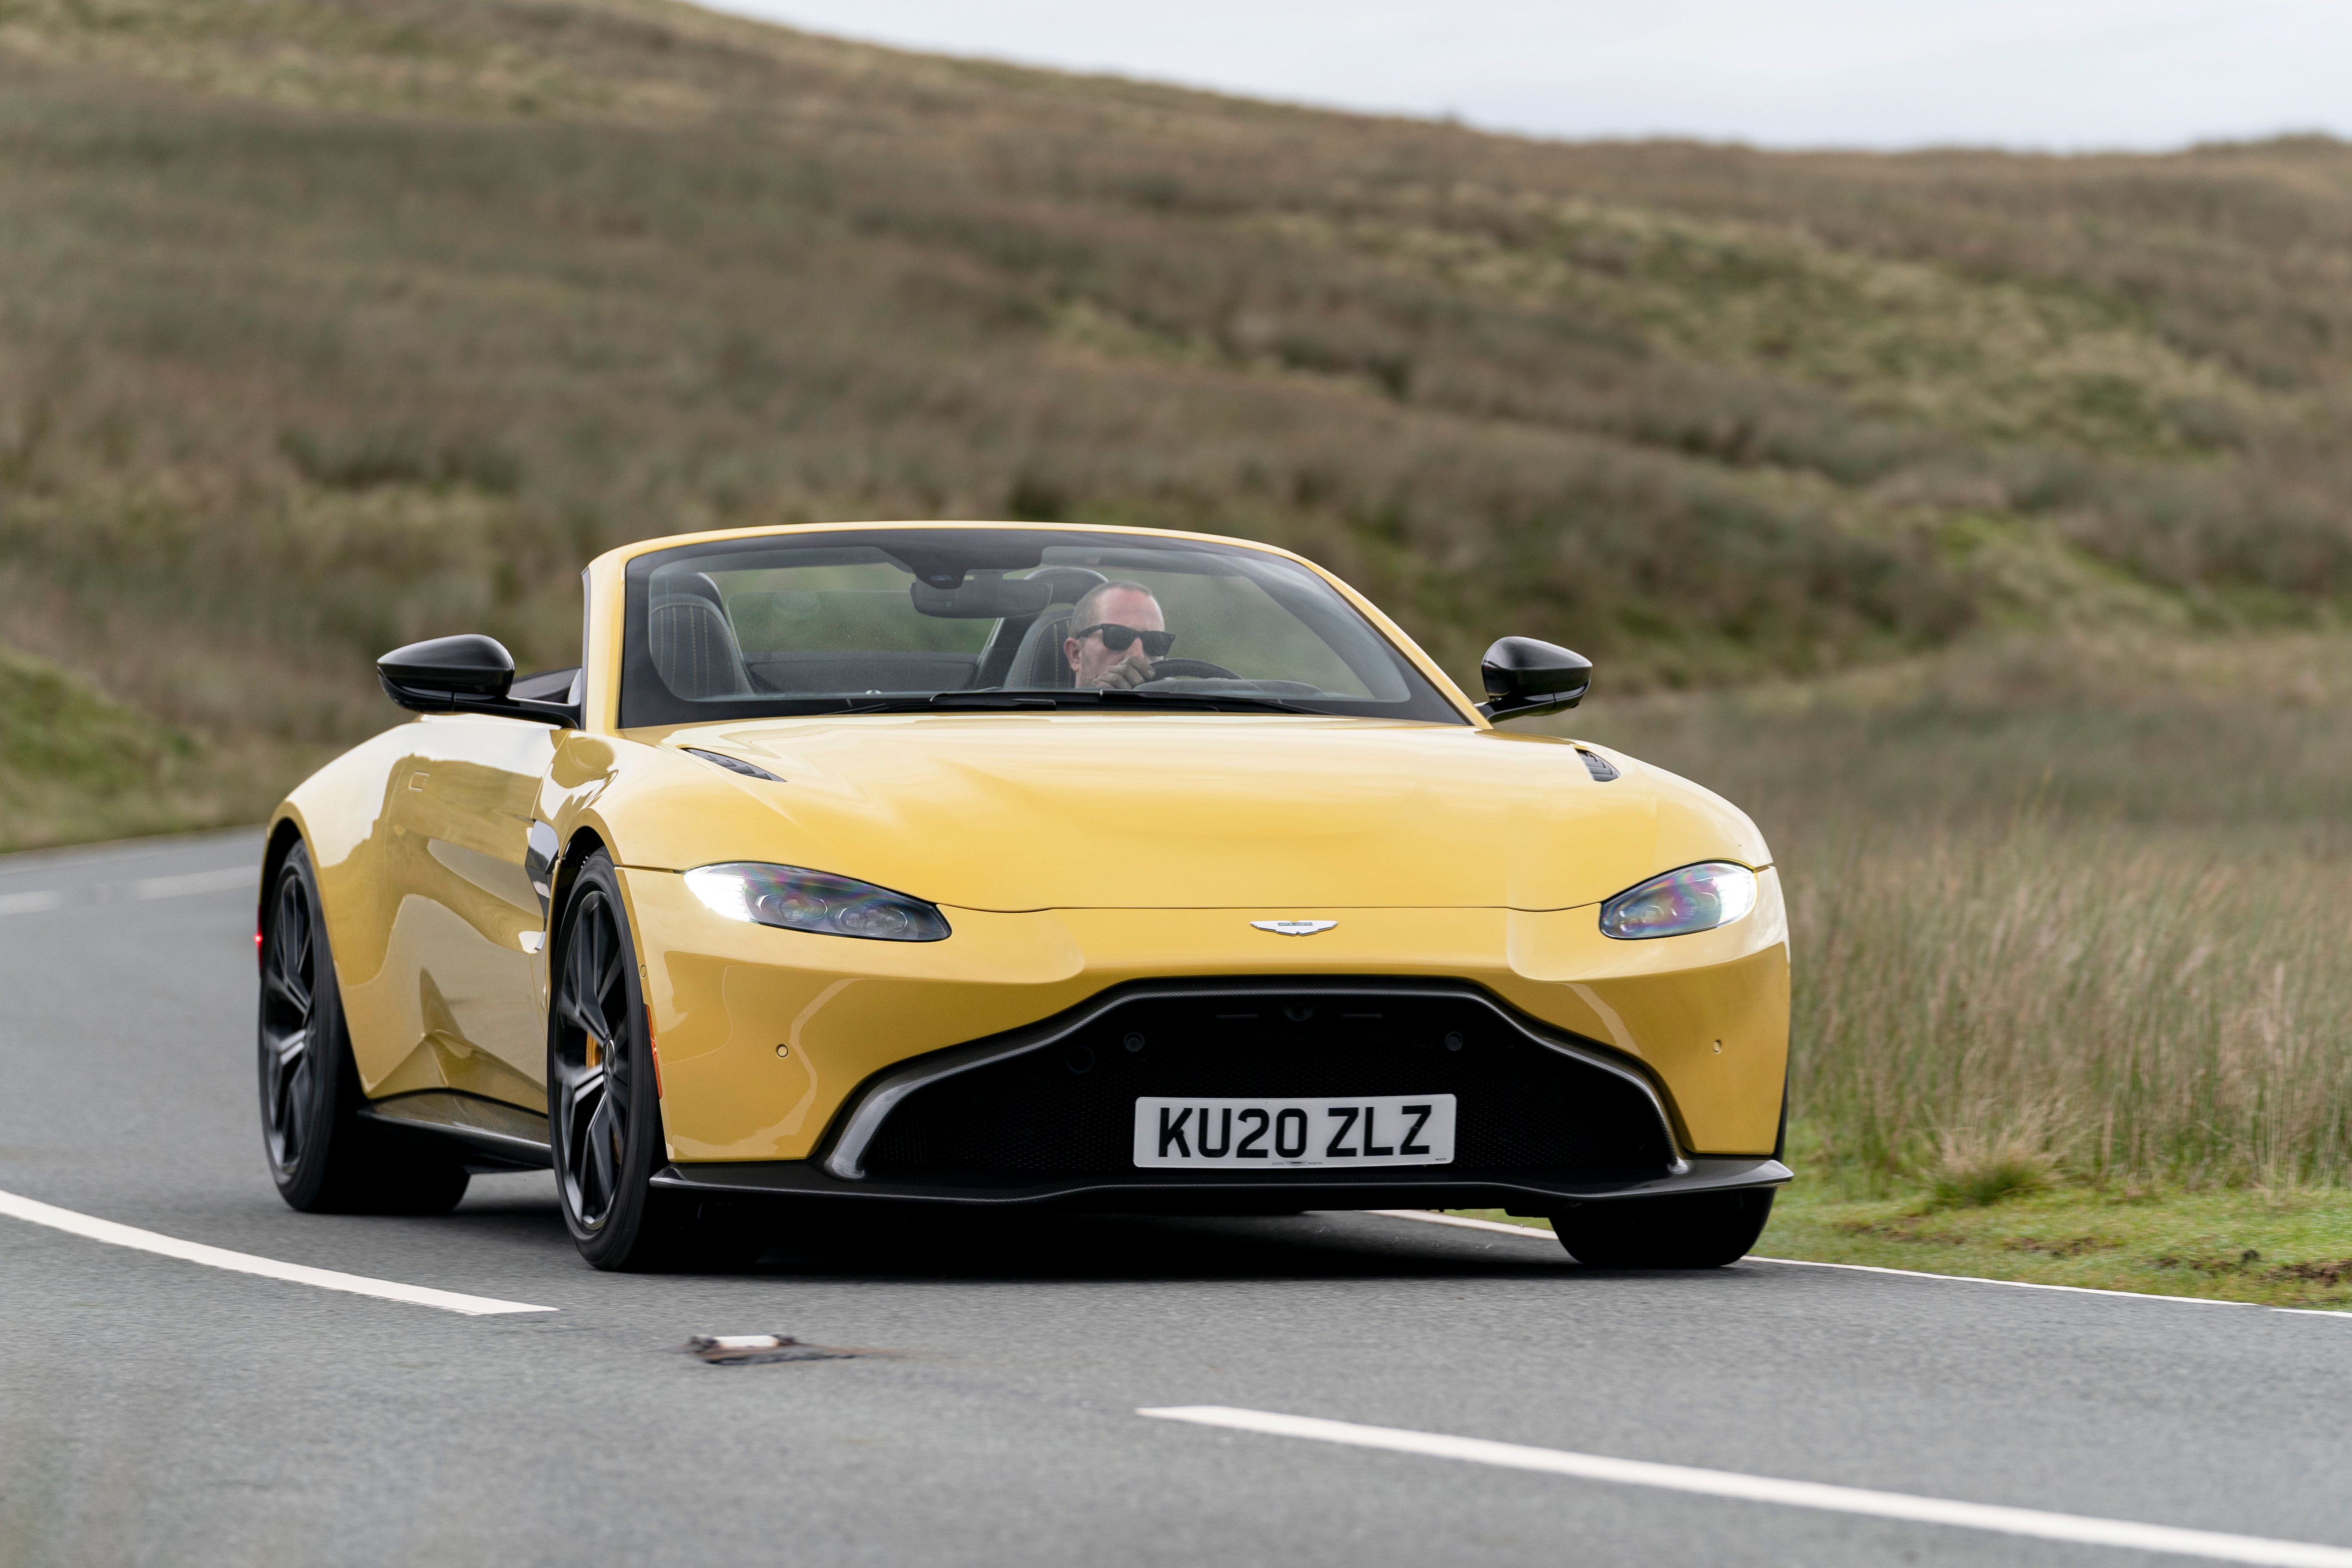 The front of a Yellow Tang Vantage Roadster